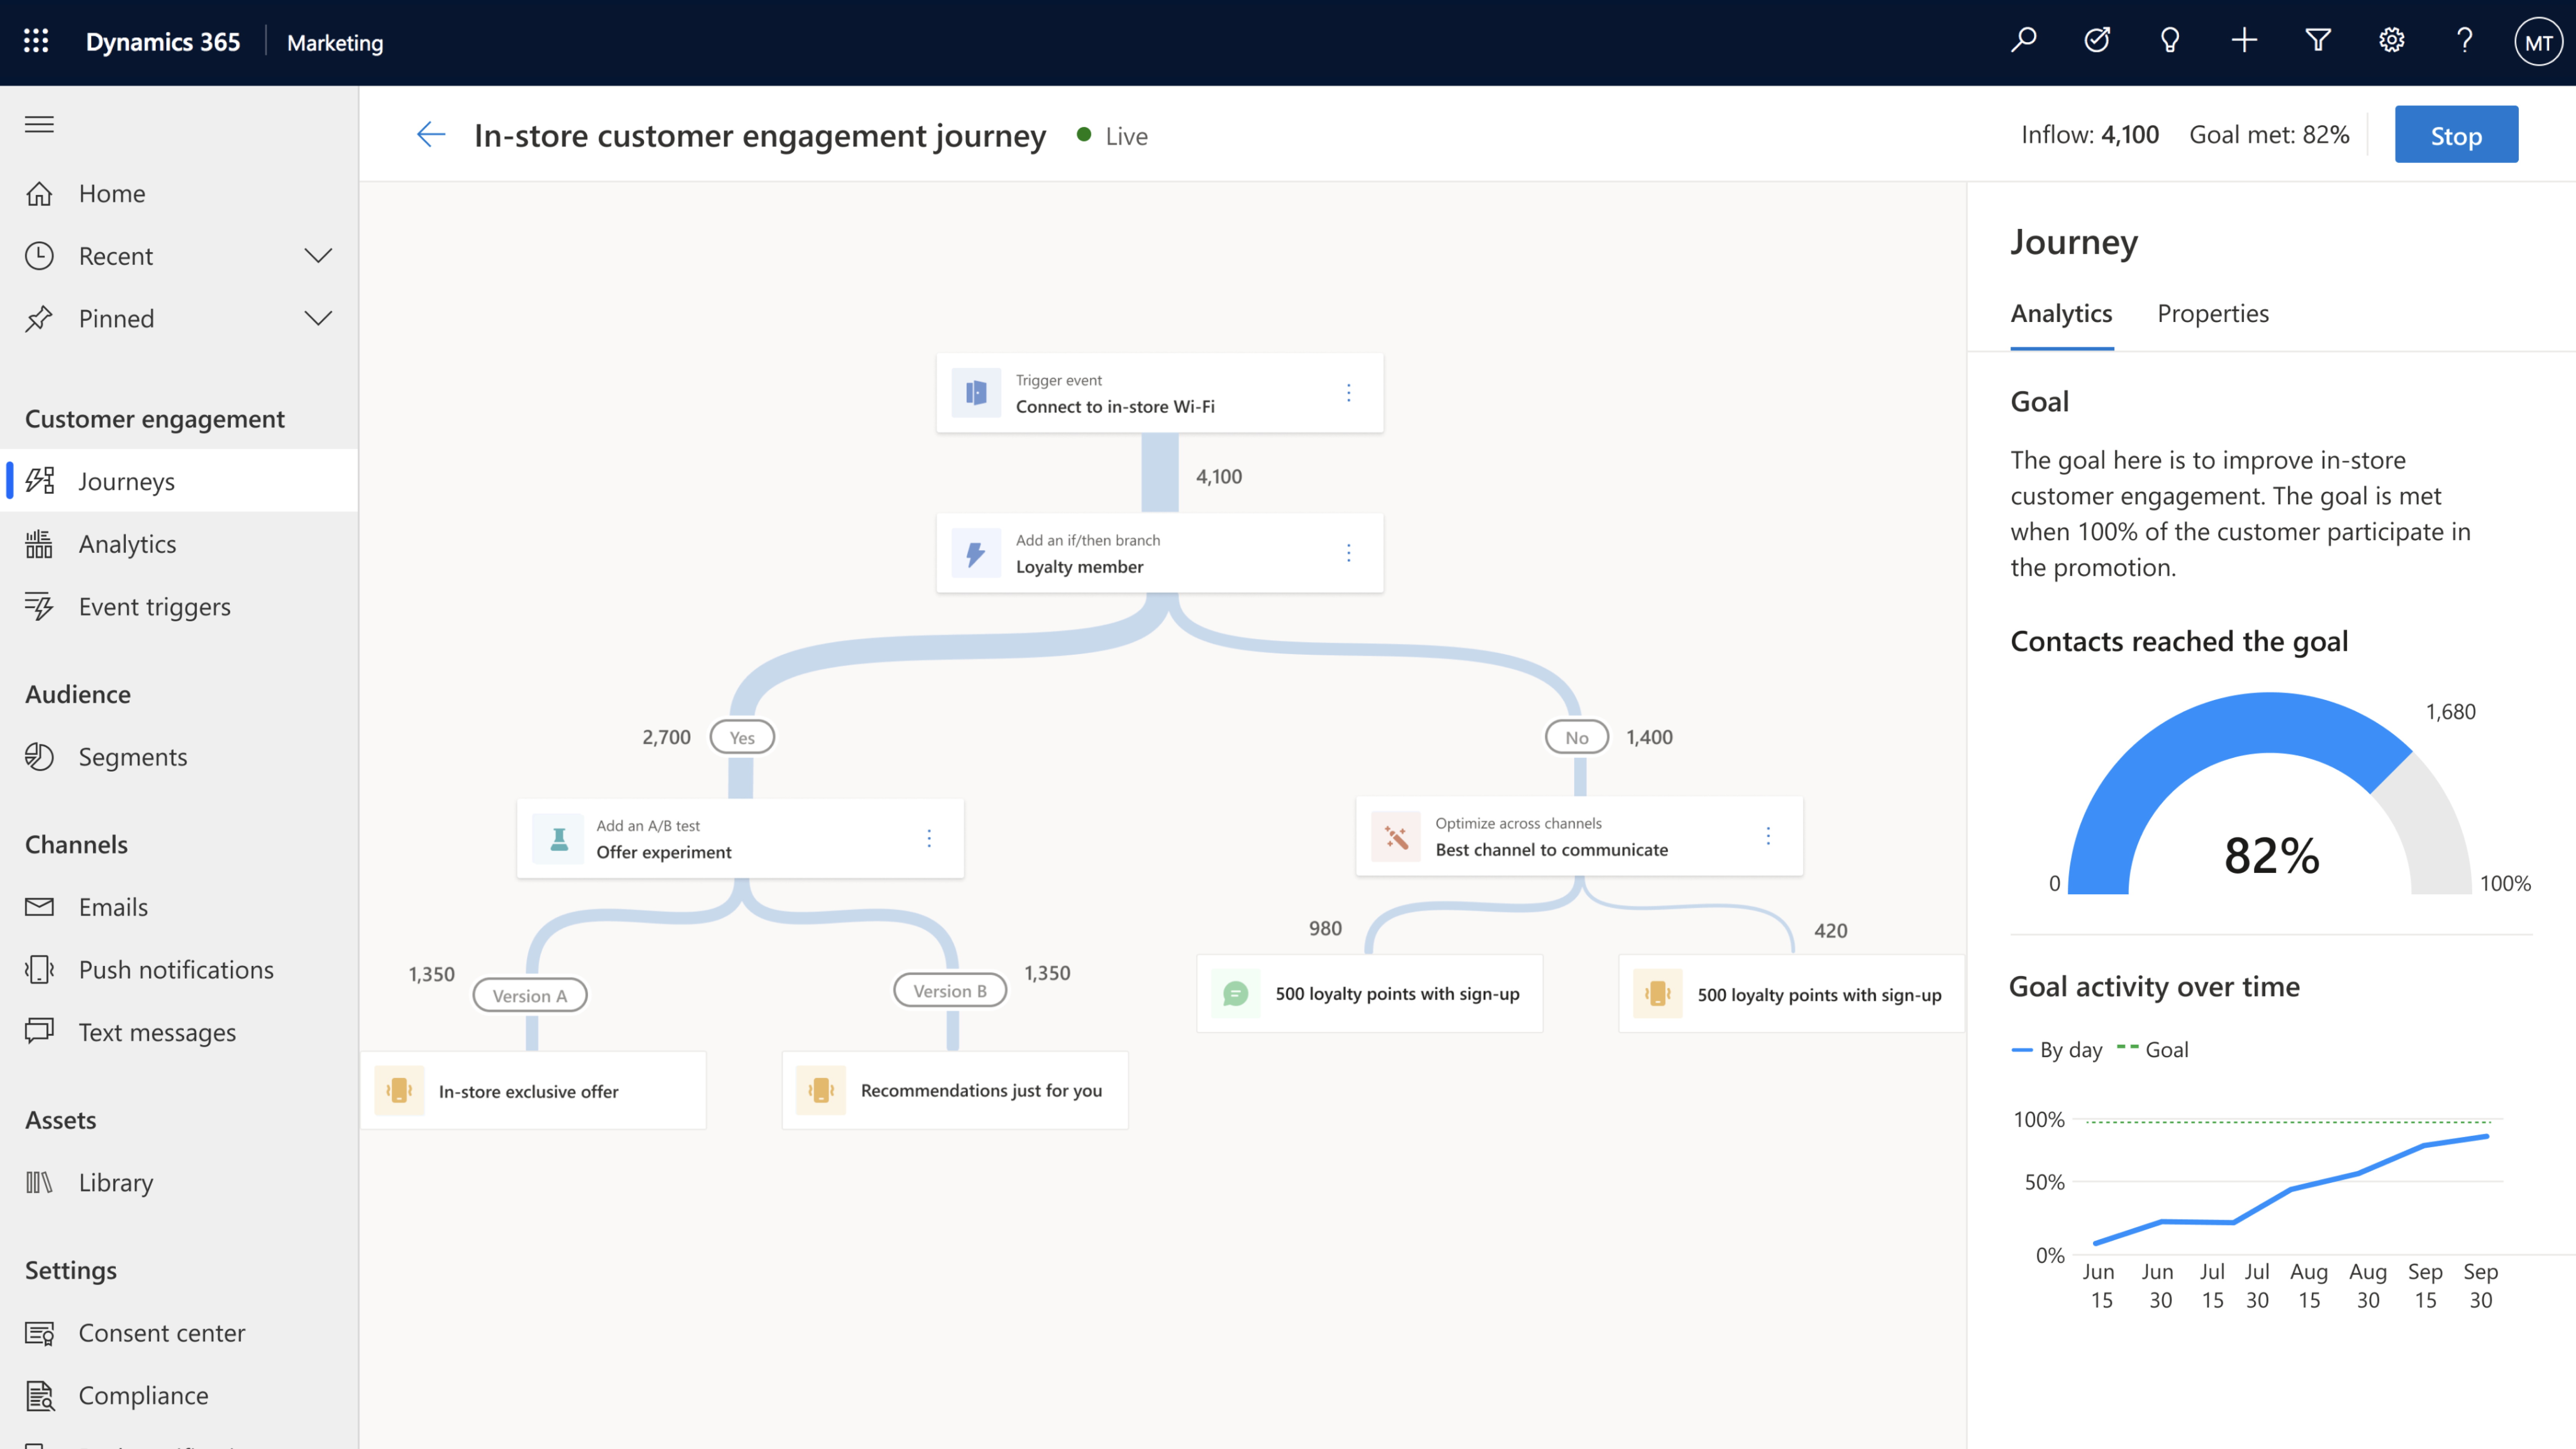 Dynamics 365 Marketing responds to customer actions during the journey.